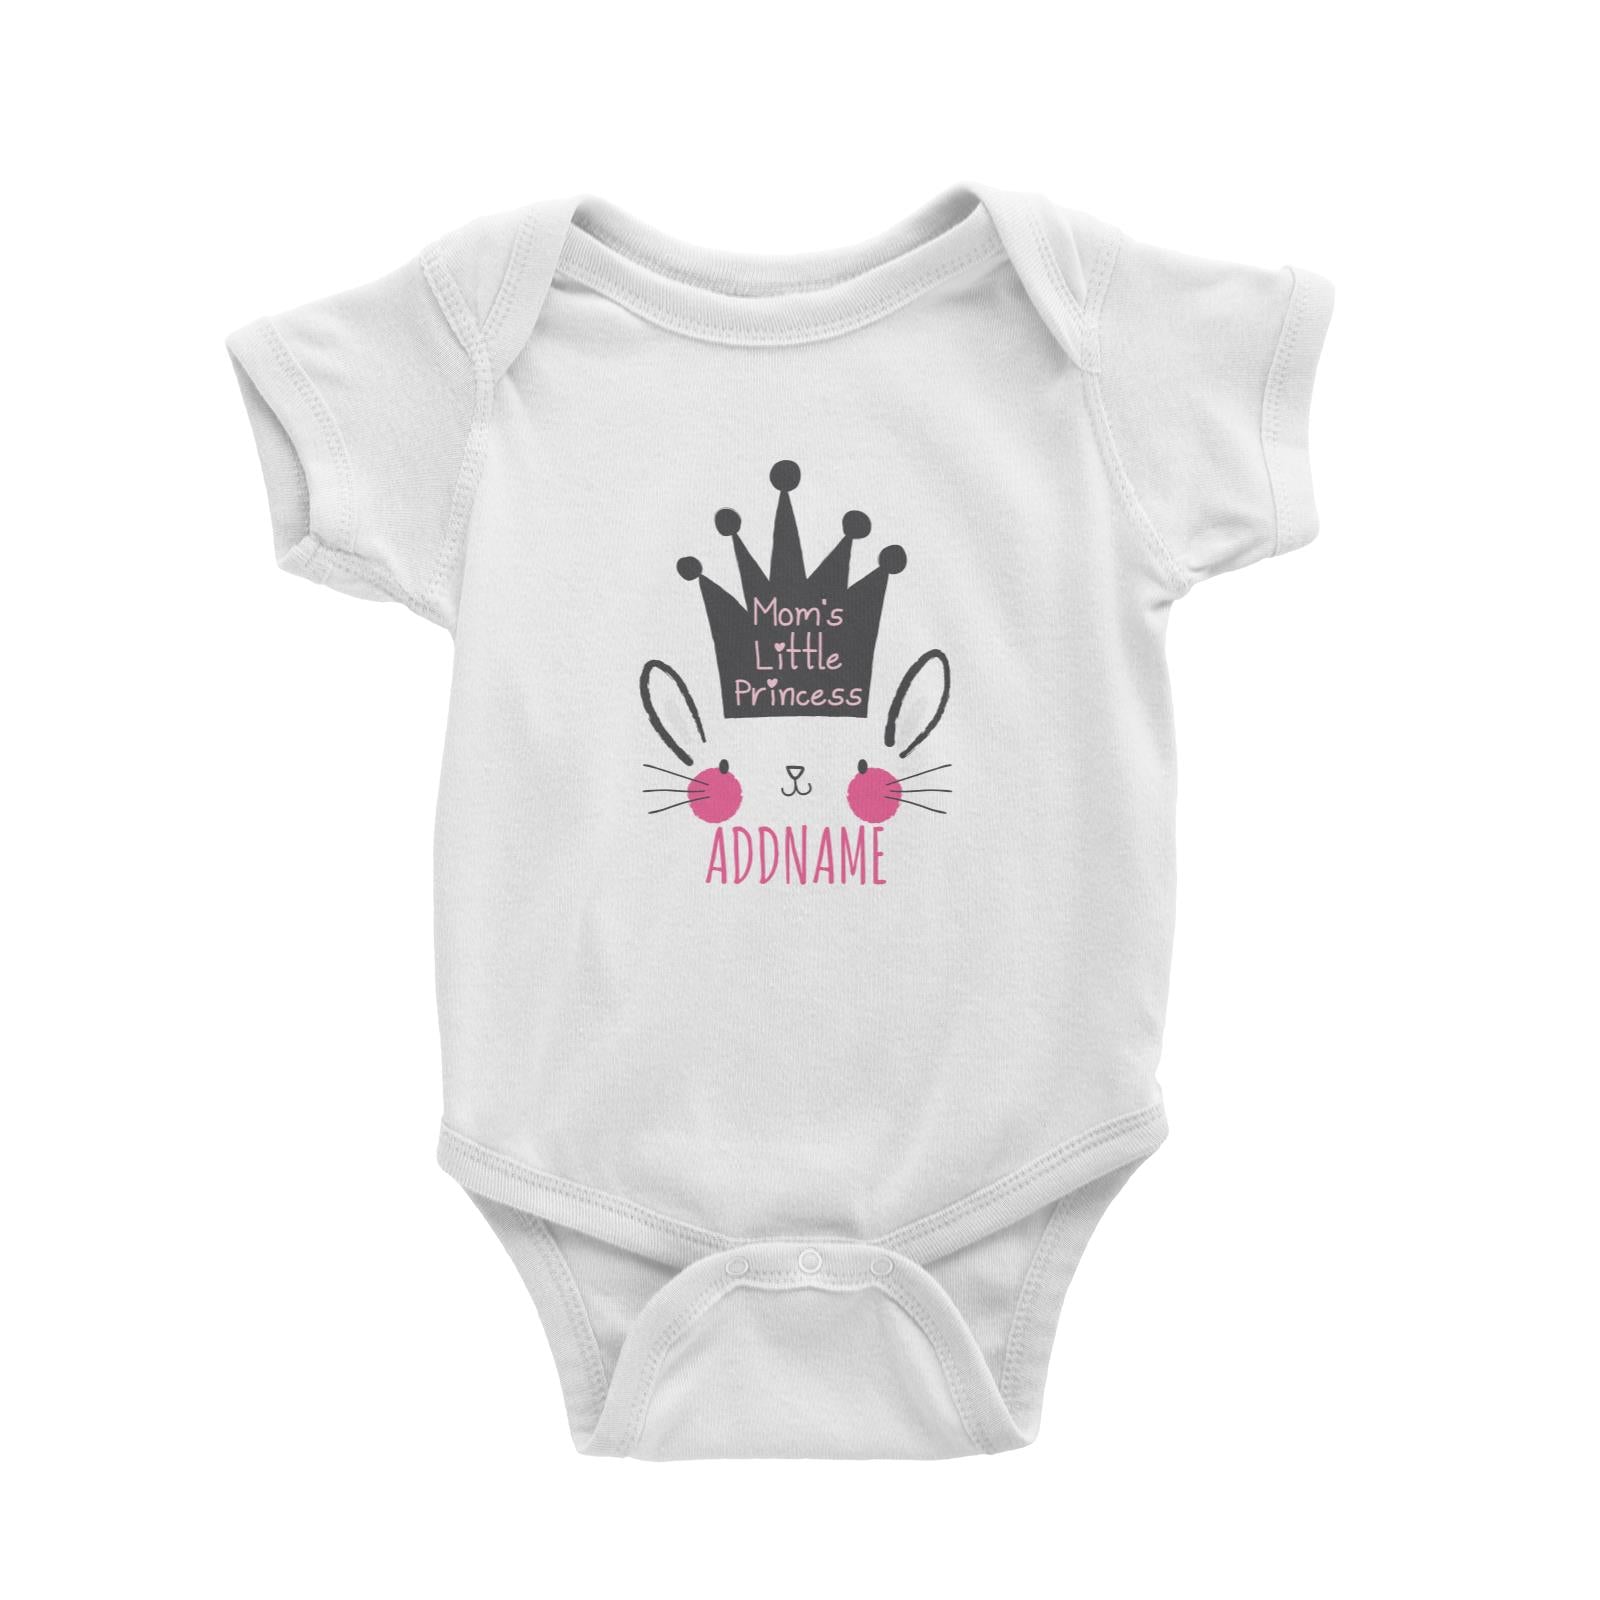 Mom's Little Princess Bunny Addname White Baby Romper